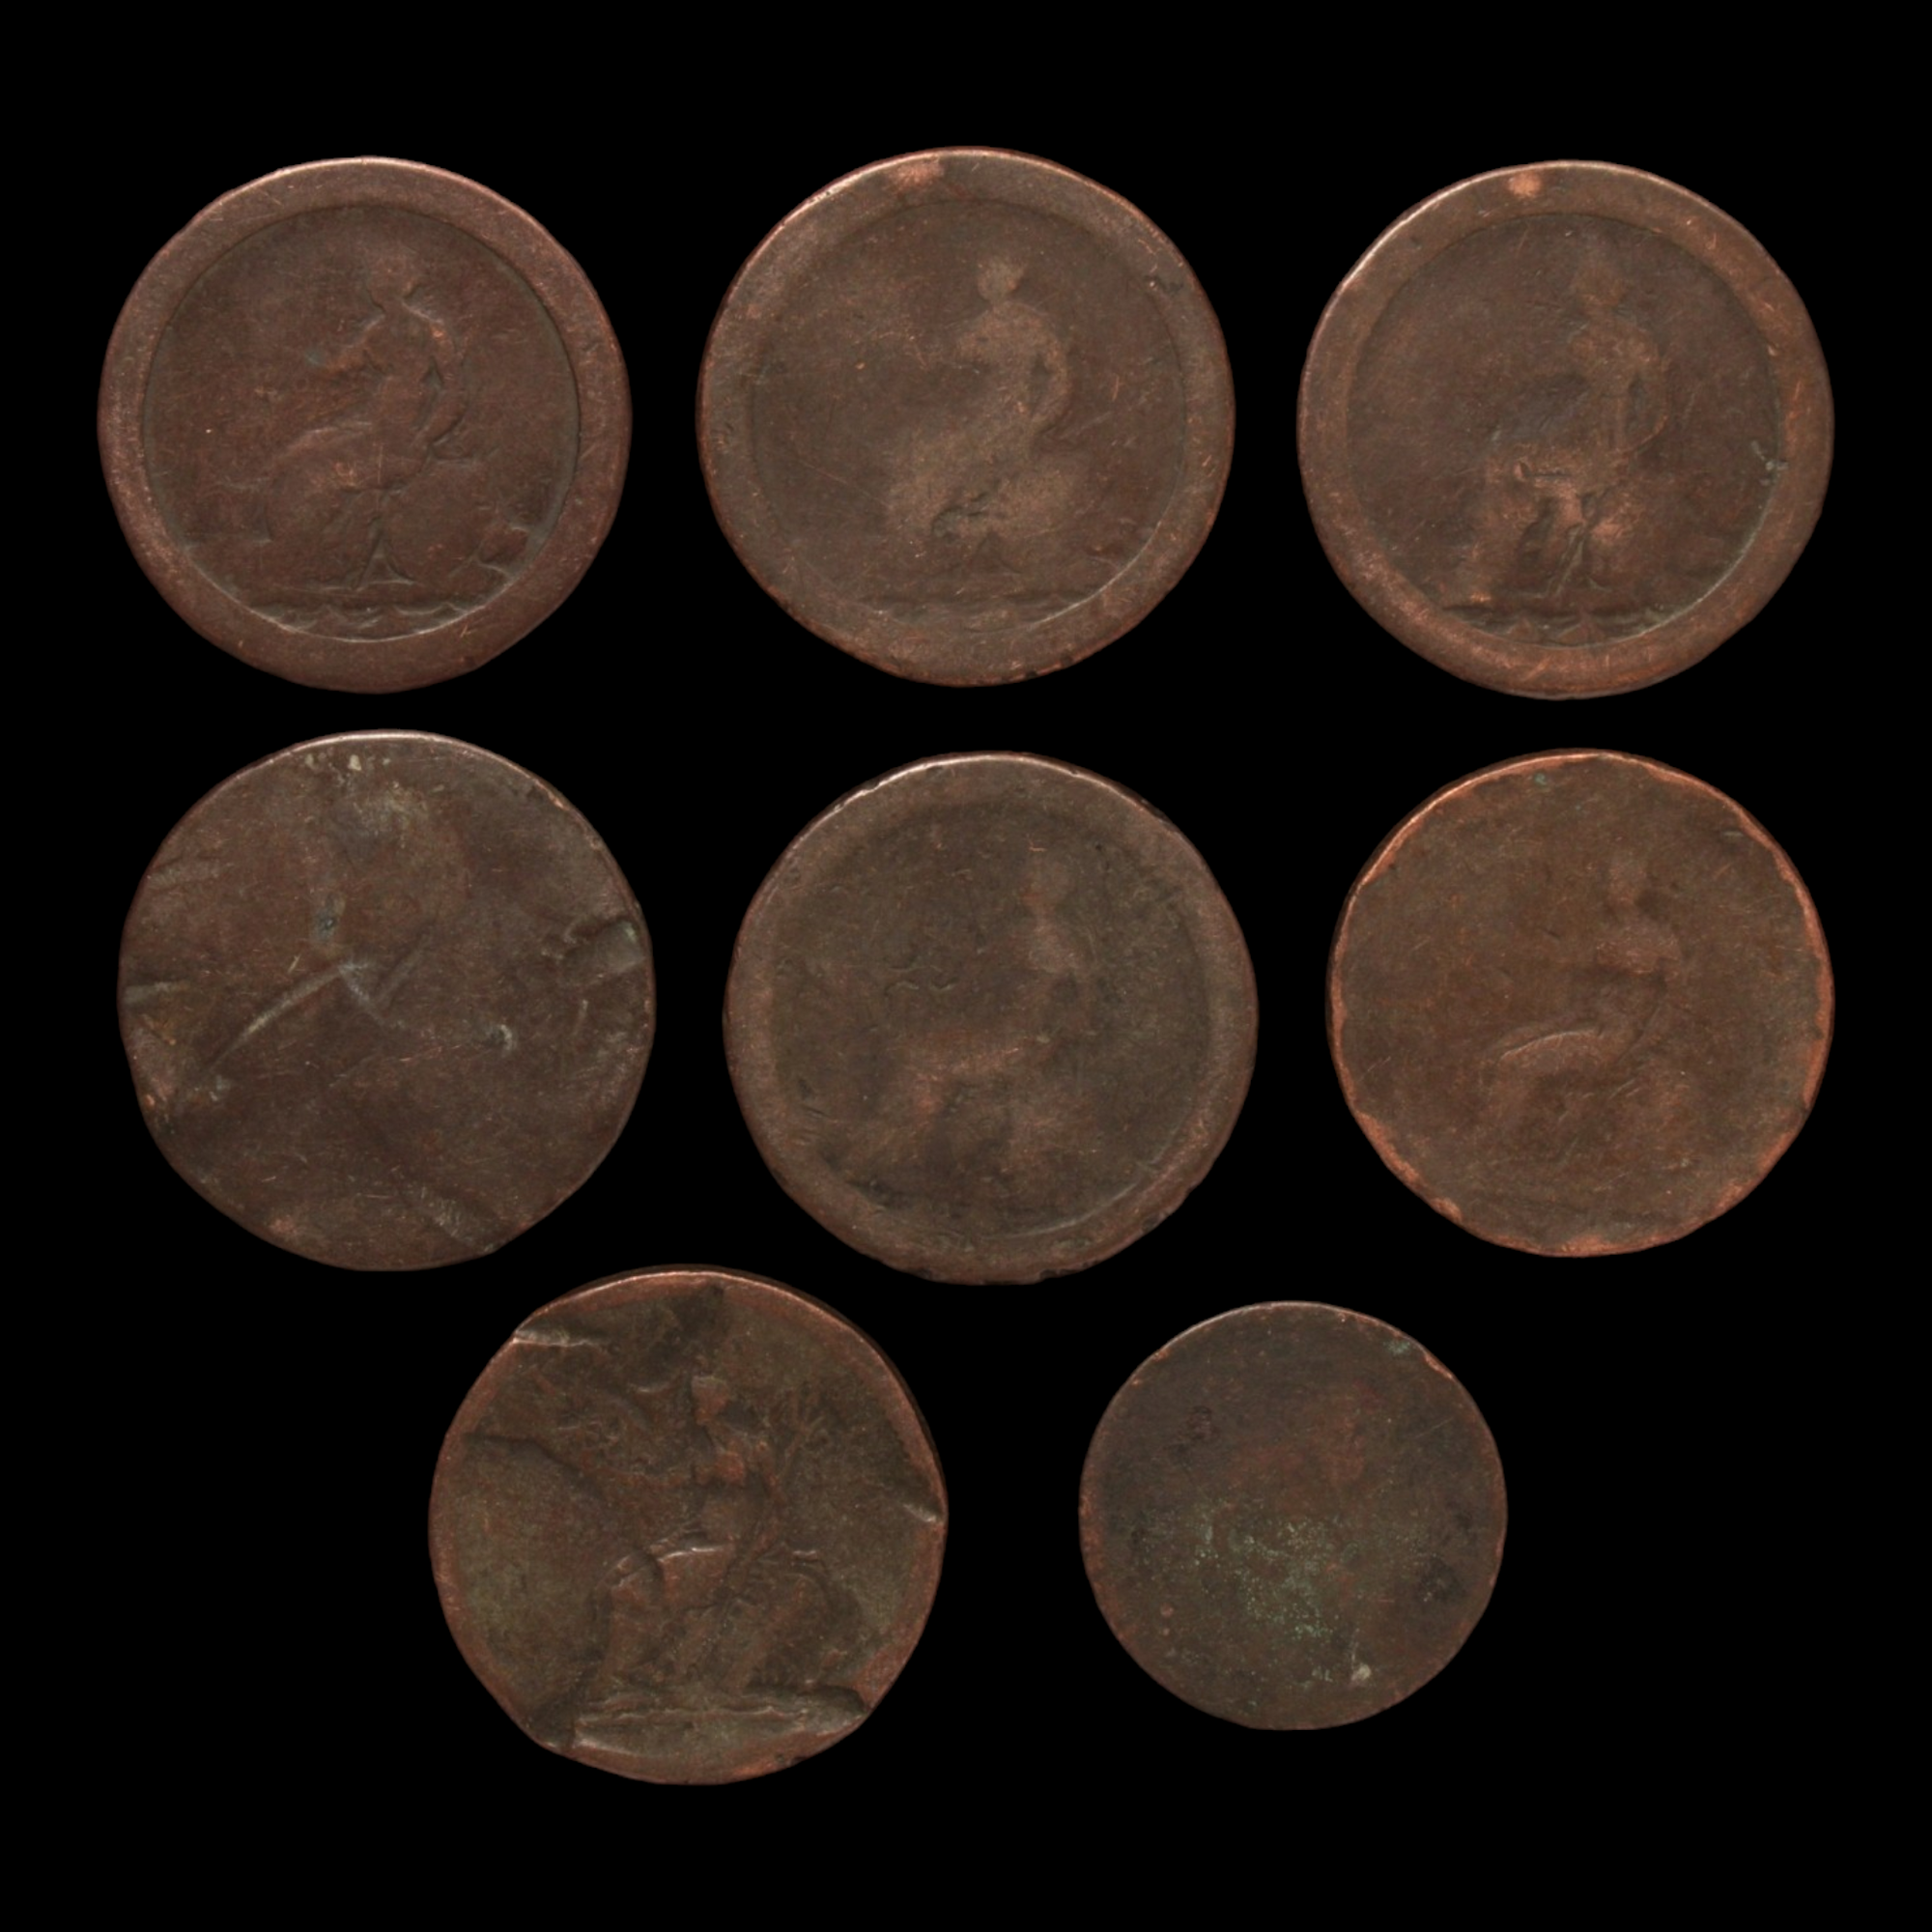 Lot of 8 British Coppers, George III, Low Grade - 1790s to 1800s - Great Britain